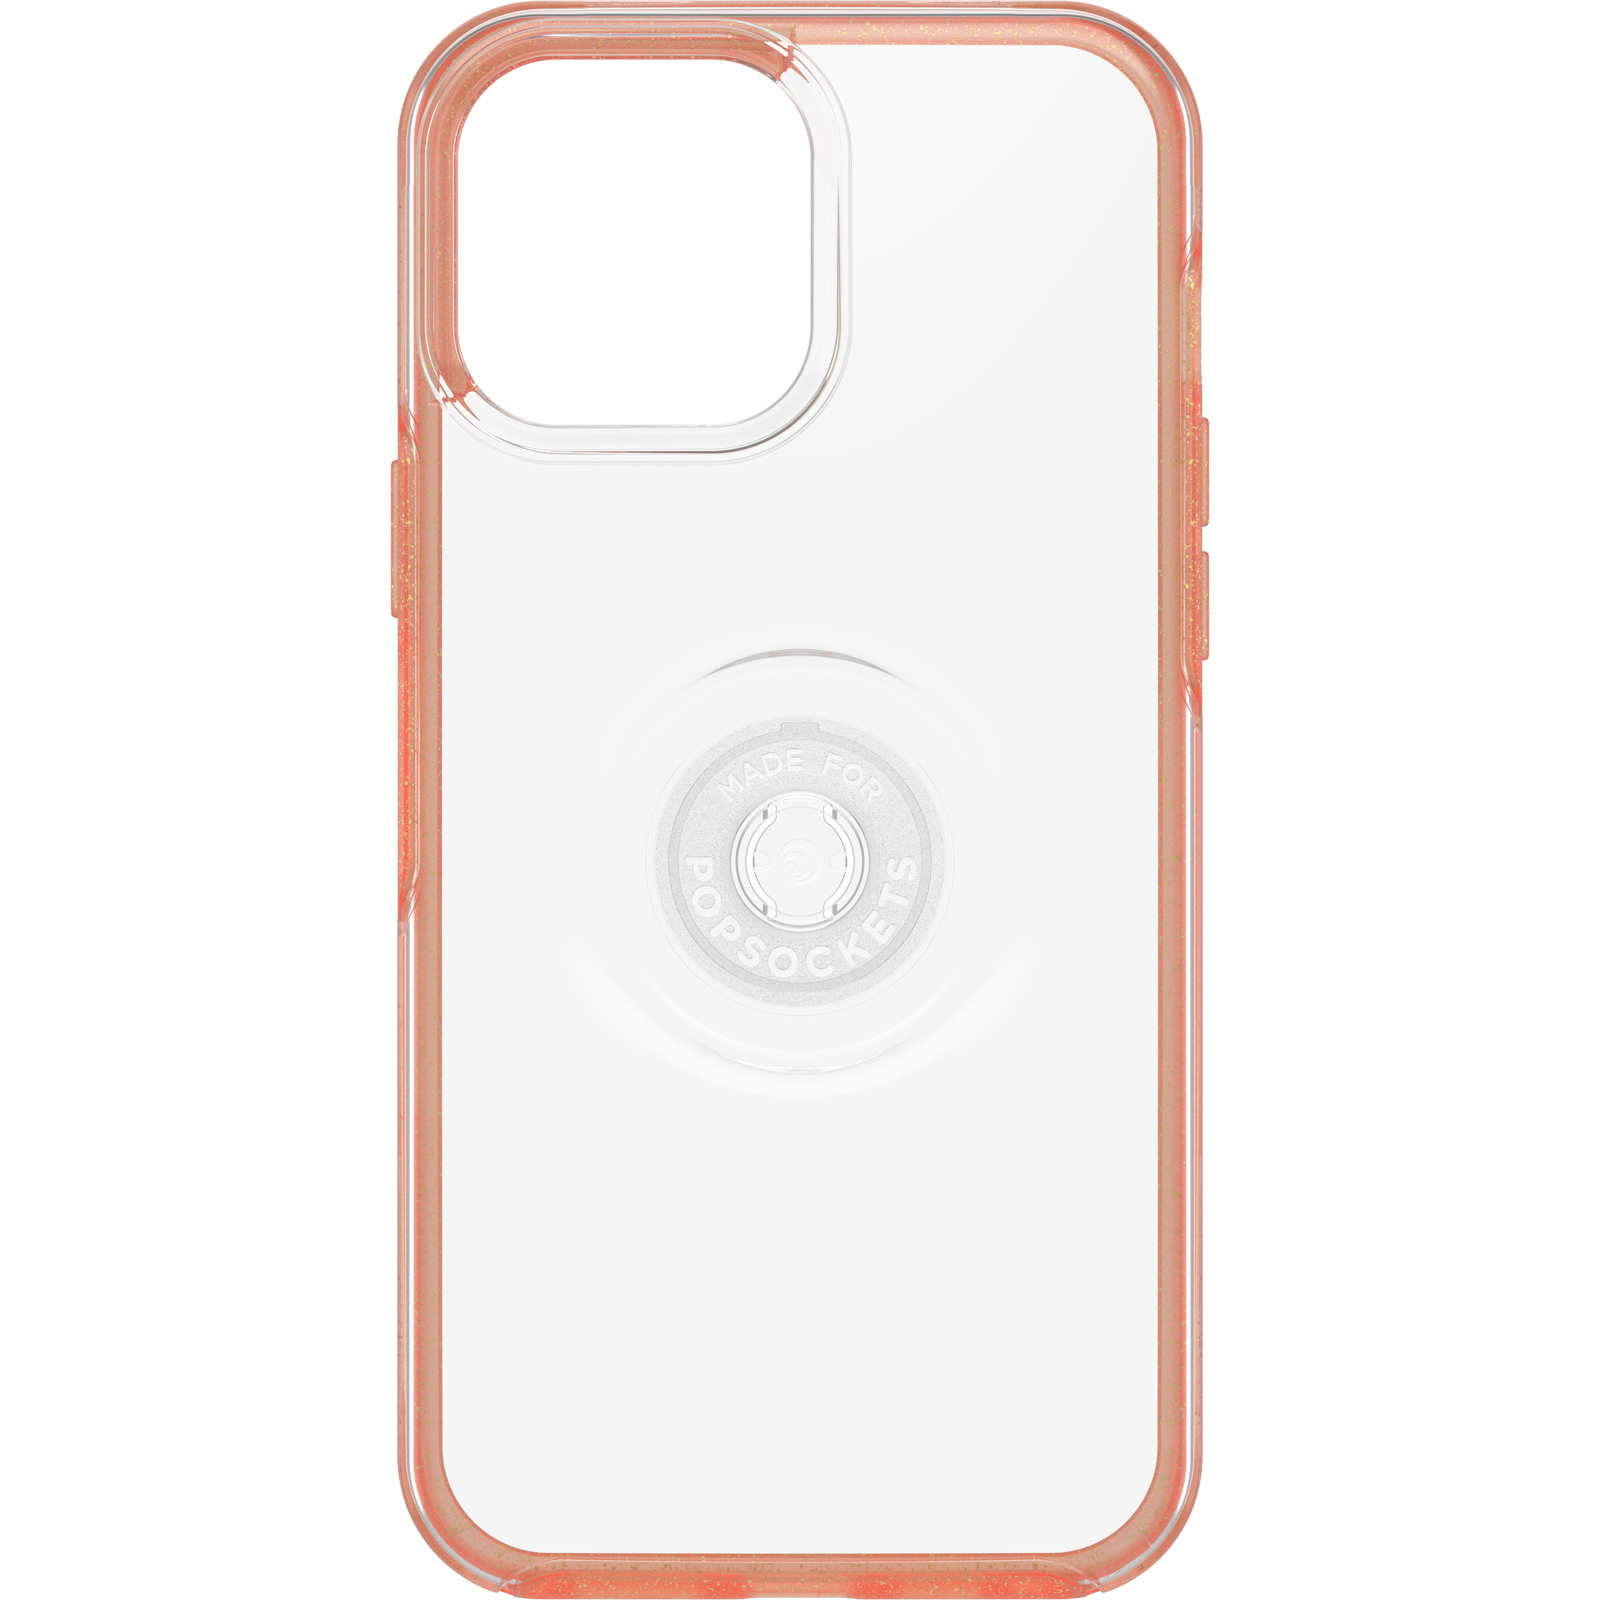 OTTERBOX Apple iPhone 13 Pro Max Otter + Pop Symmetry Series Clear Case - Melondramatic (Clear/Orange) (77-83713), Swappable PopTop